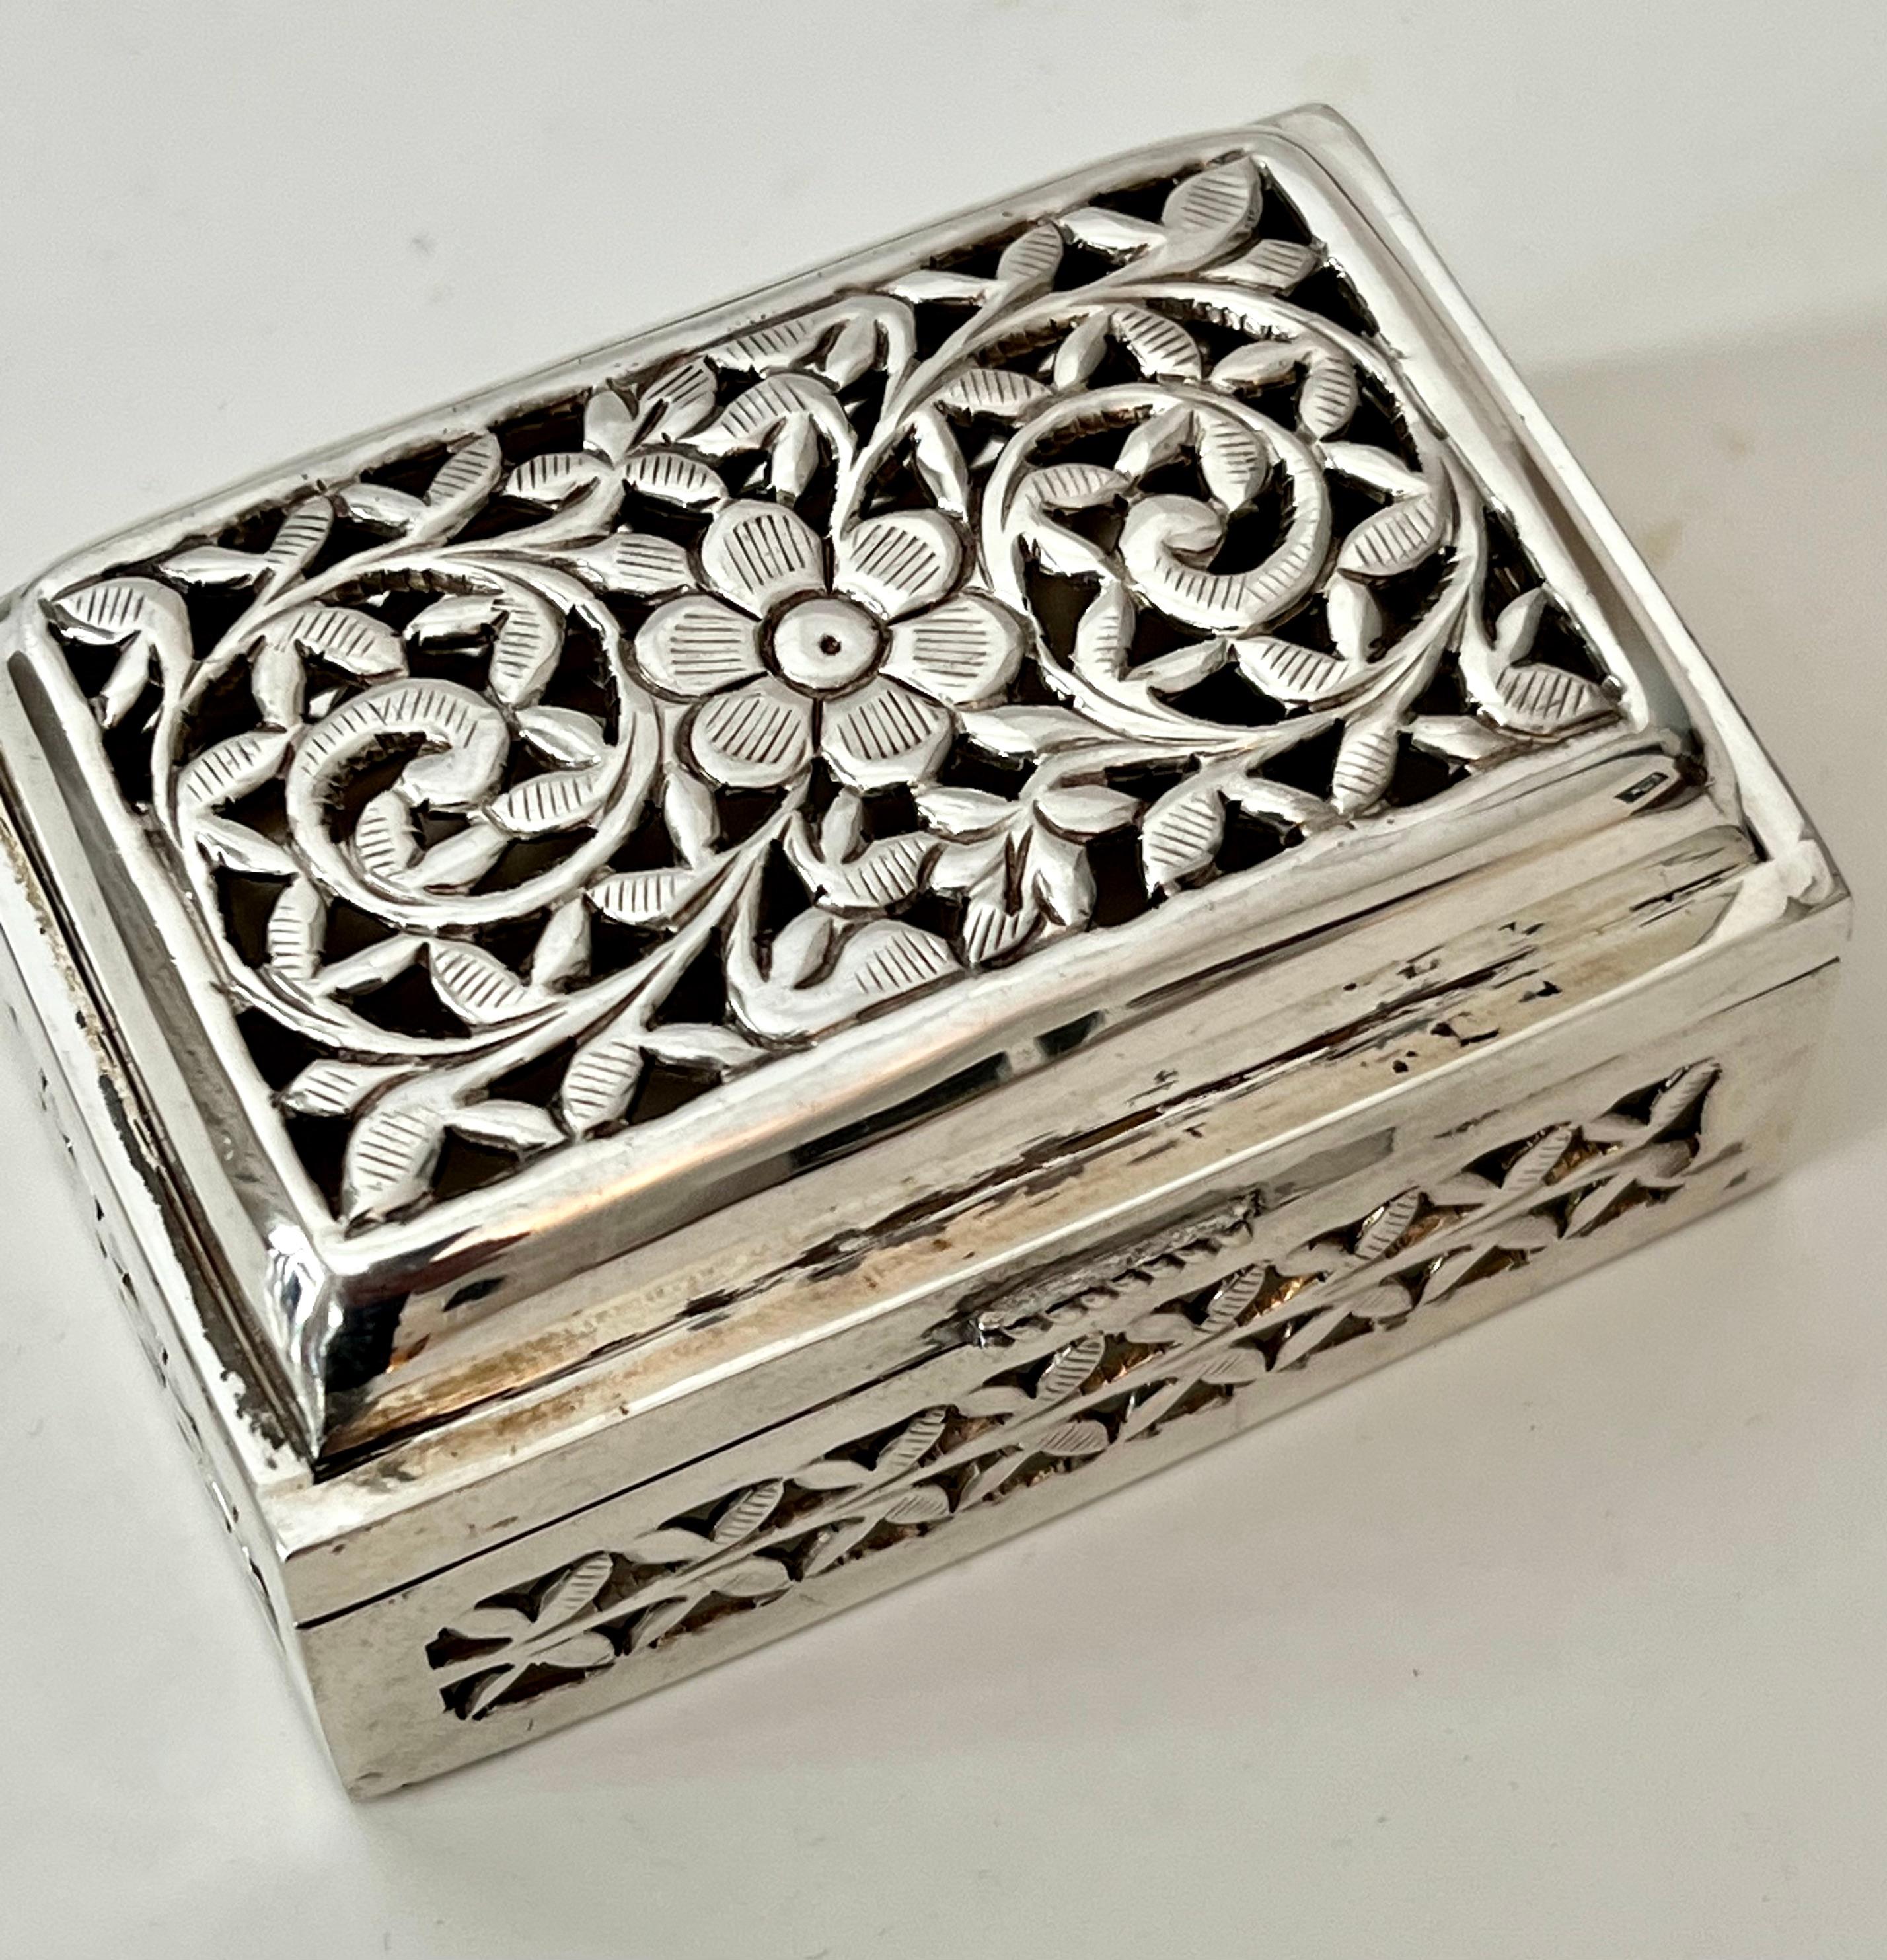 A hand crafted sterling box with cut-outs in the shape of botanicals of ivy, vines and flowers.  The box perhaps a vinaigrette, could now be used for herbs, fragrant florals, or 420. 

A compliment to any cocktail table, vanity, desk or work